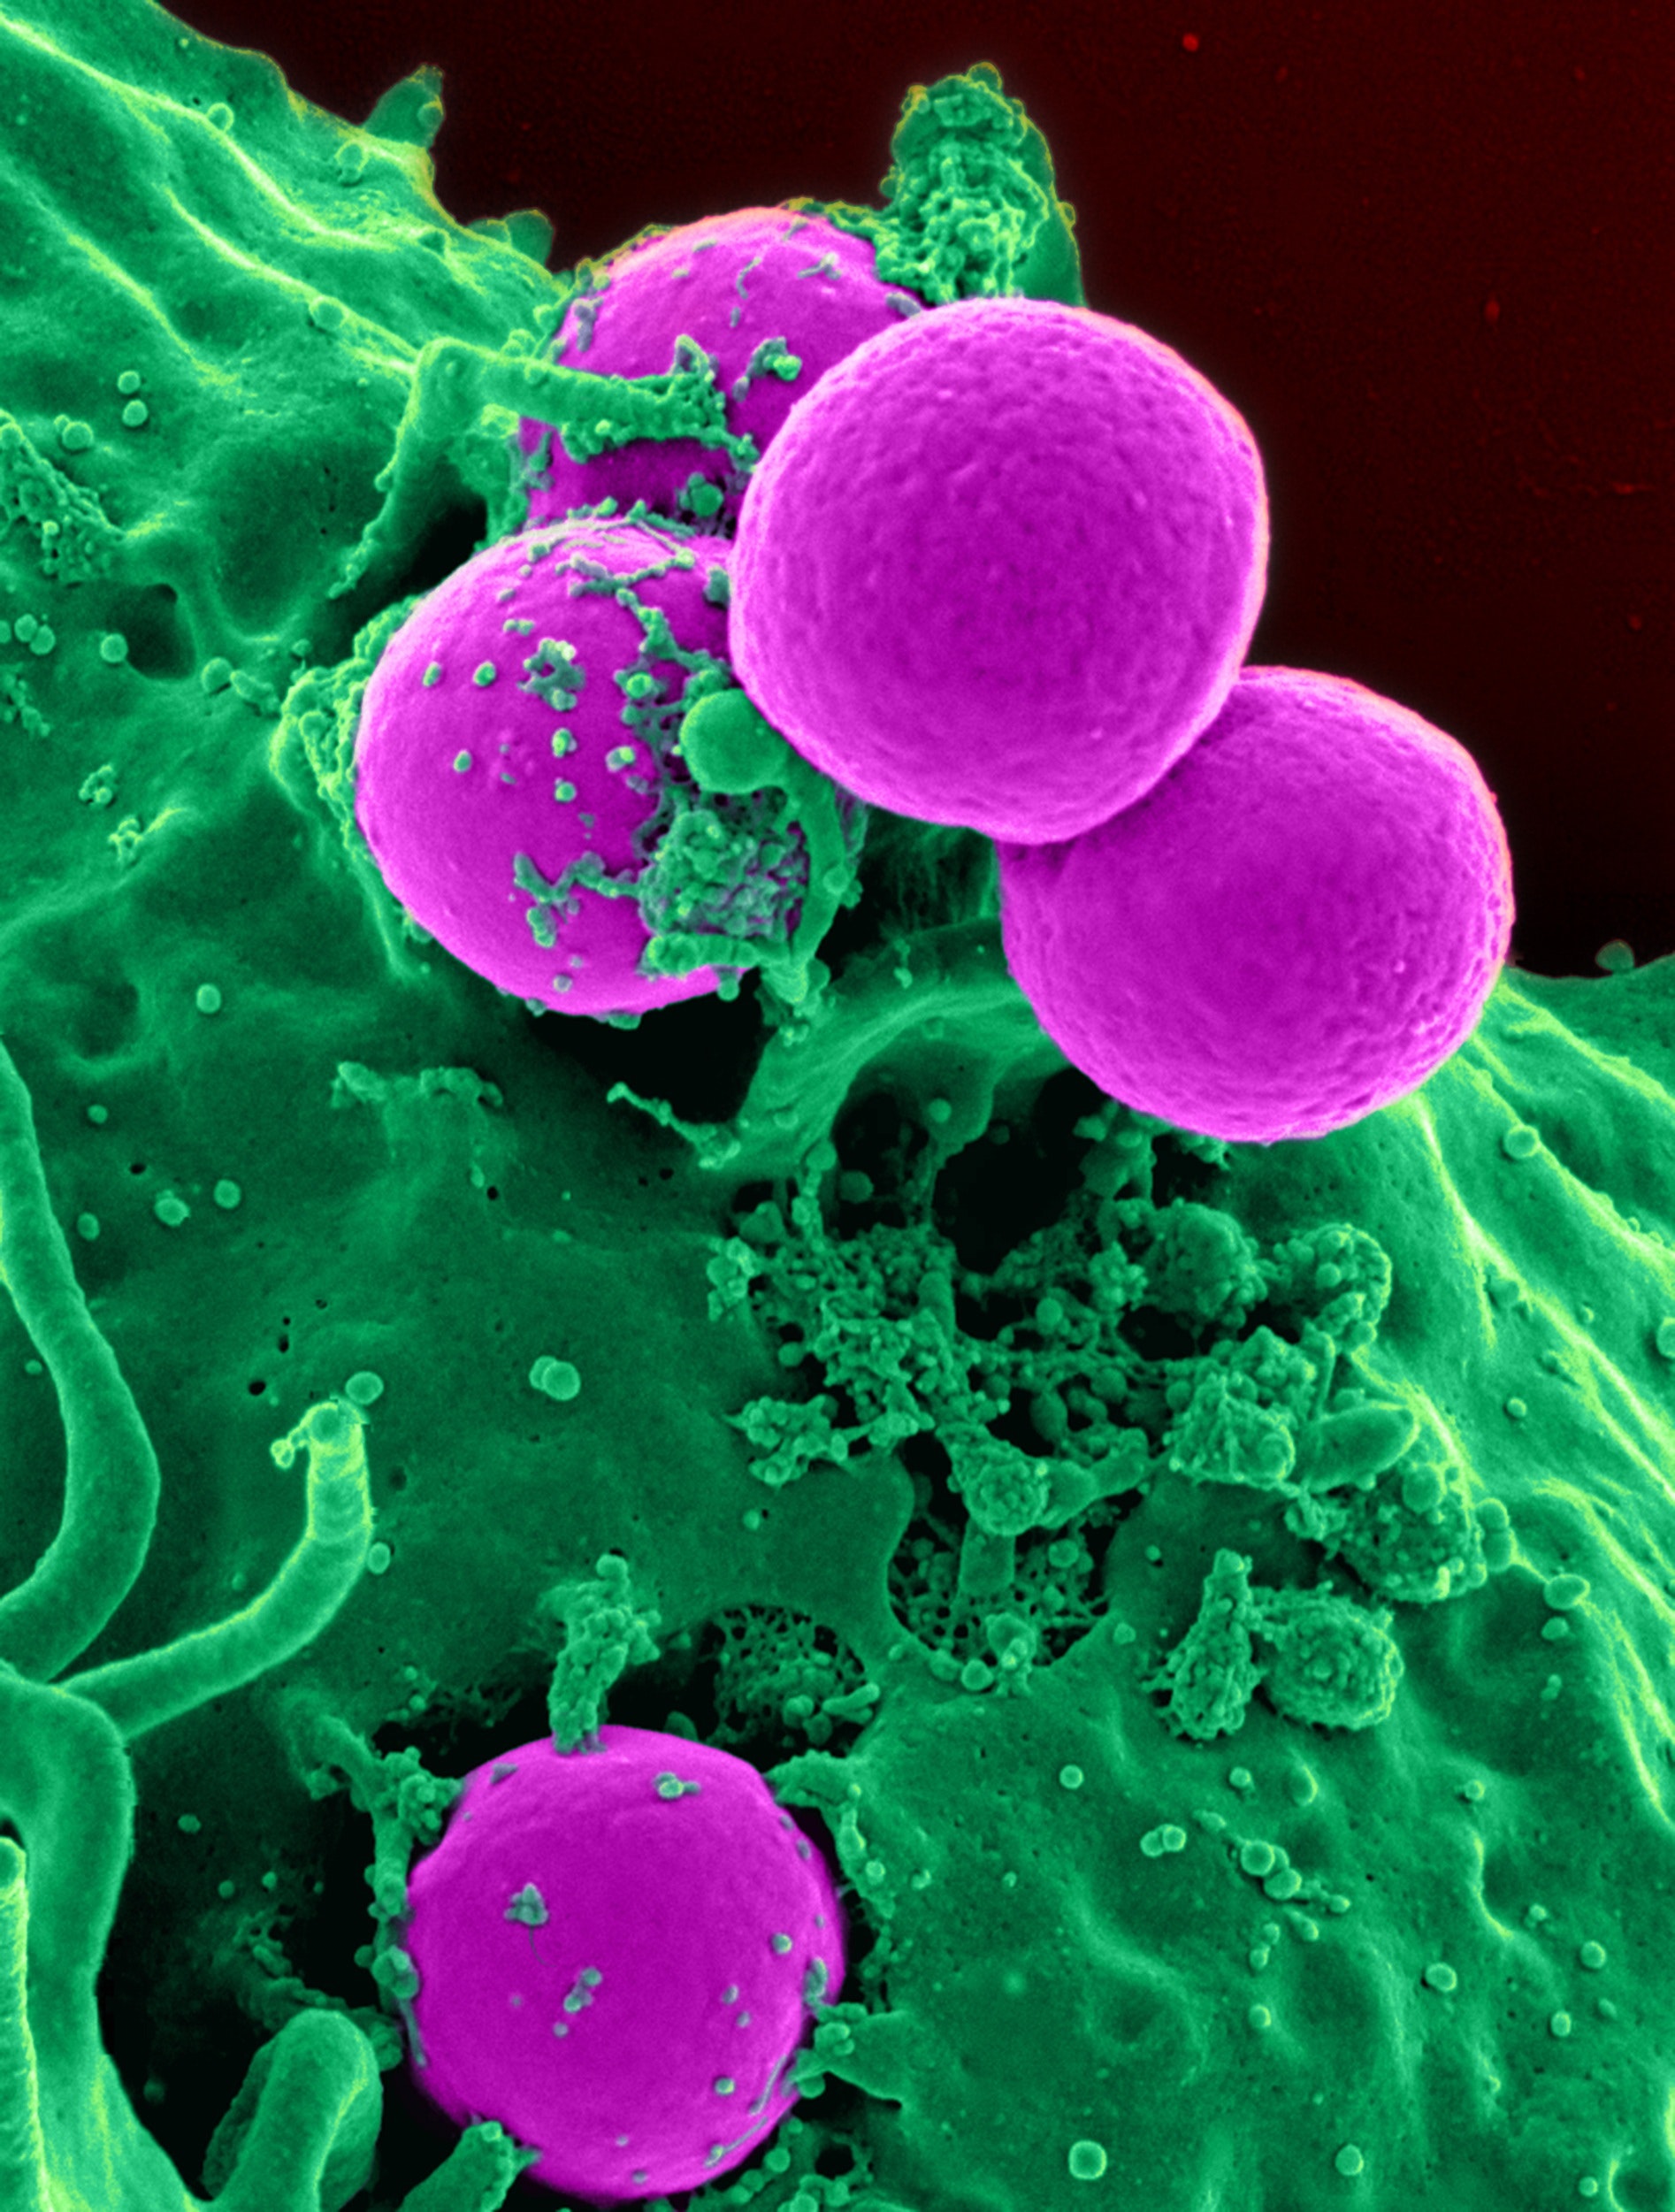 Coloured image of bacteria